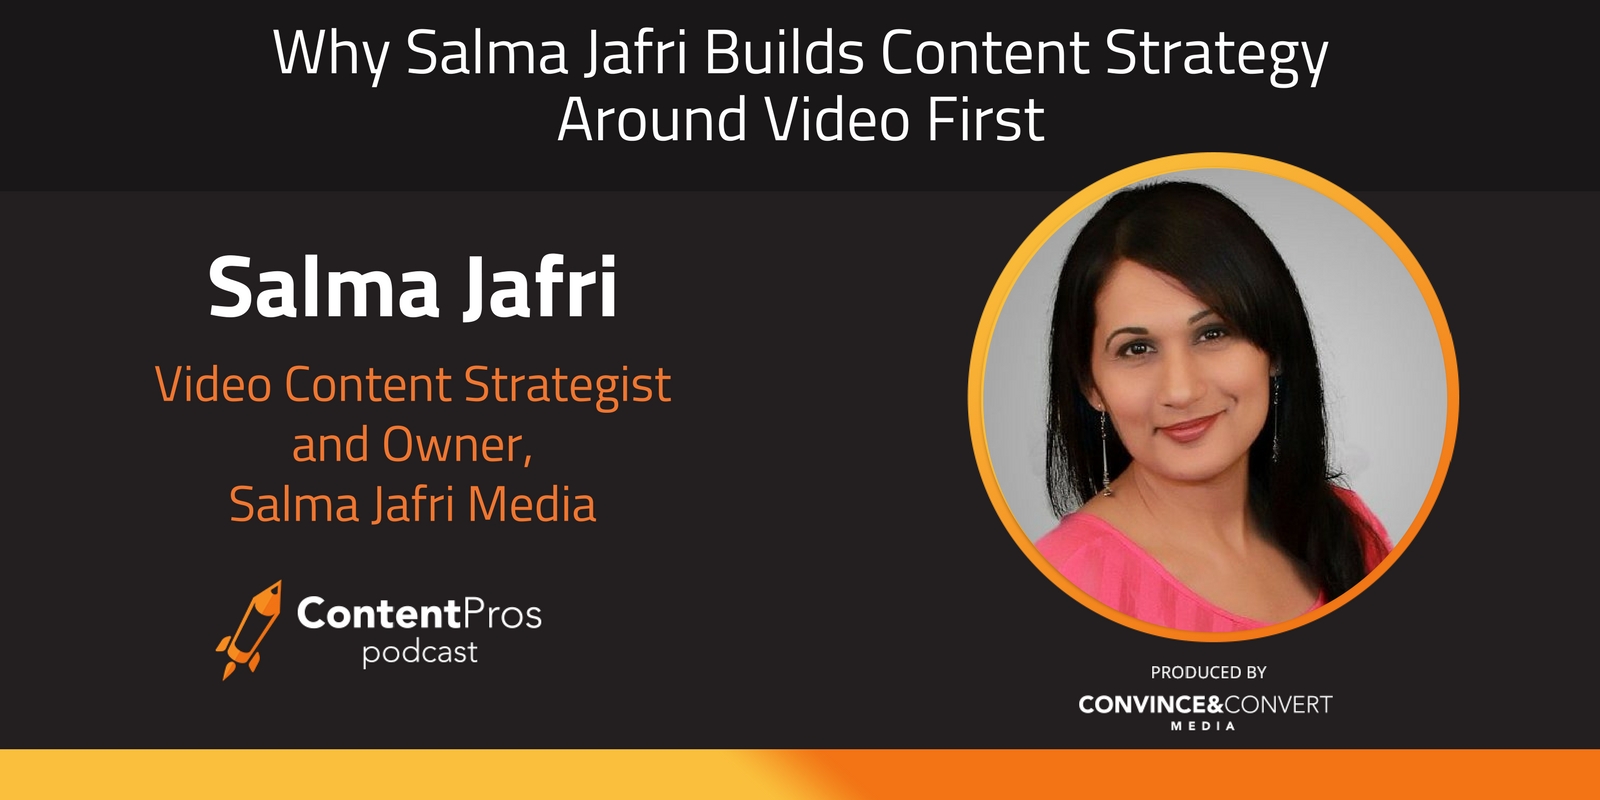 Why Salma Jafri Builds Content Strategy Around Video First